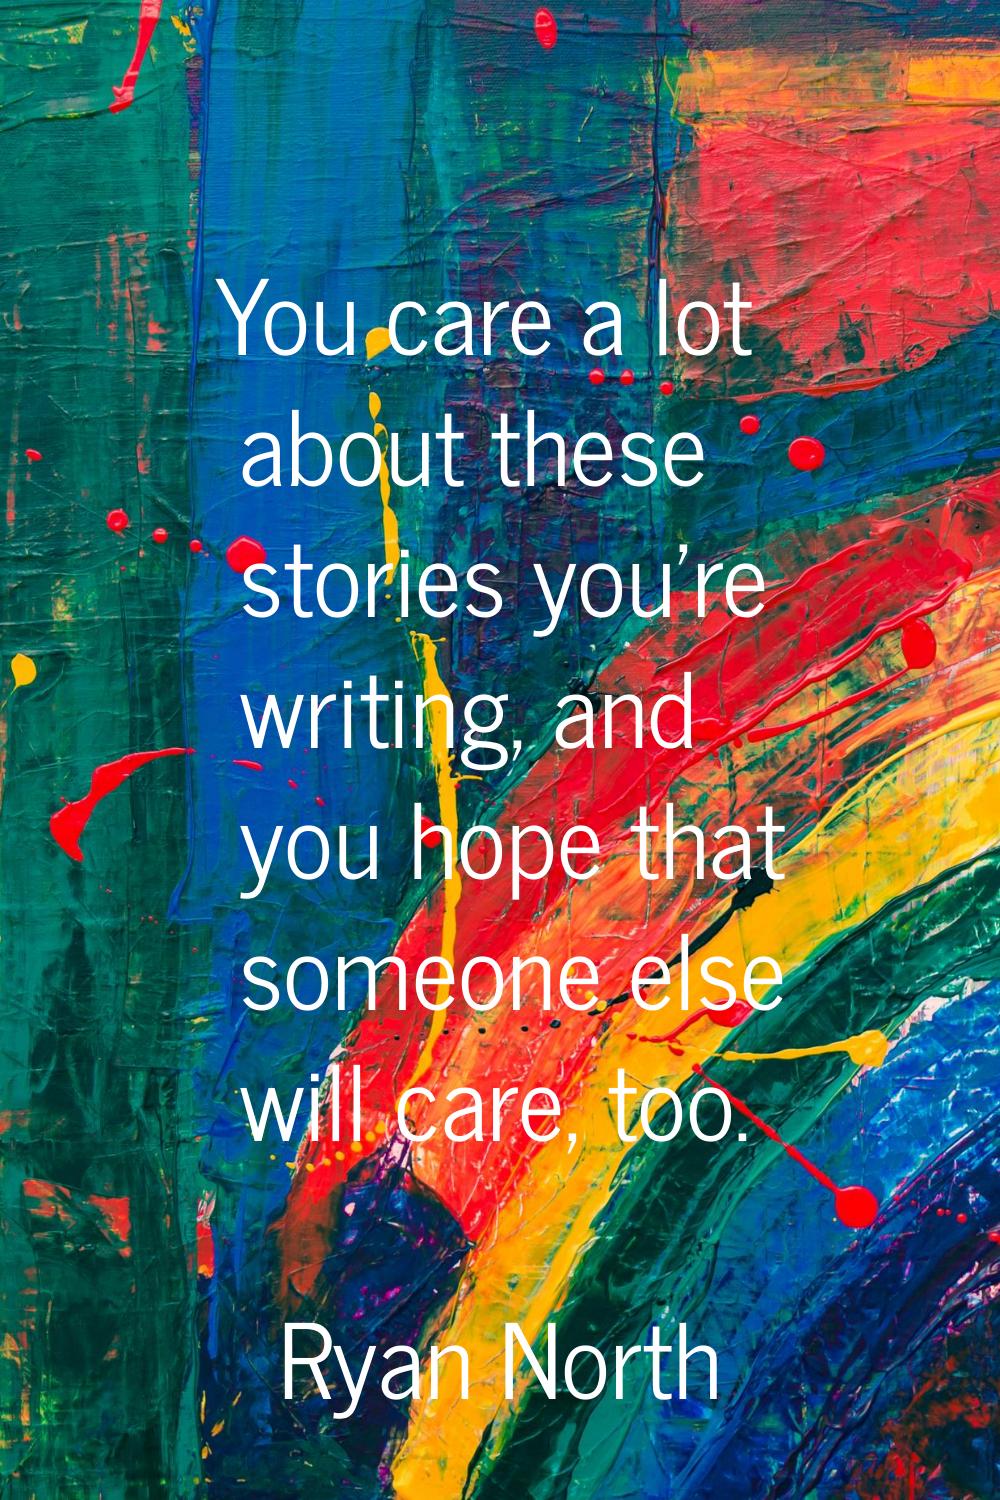 You care a lot about these stories you're writing, and you hope that someone else will care, too.